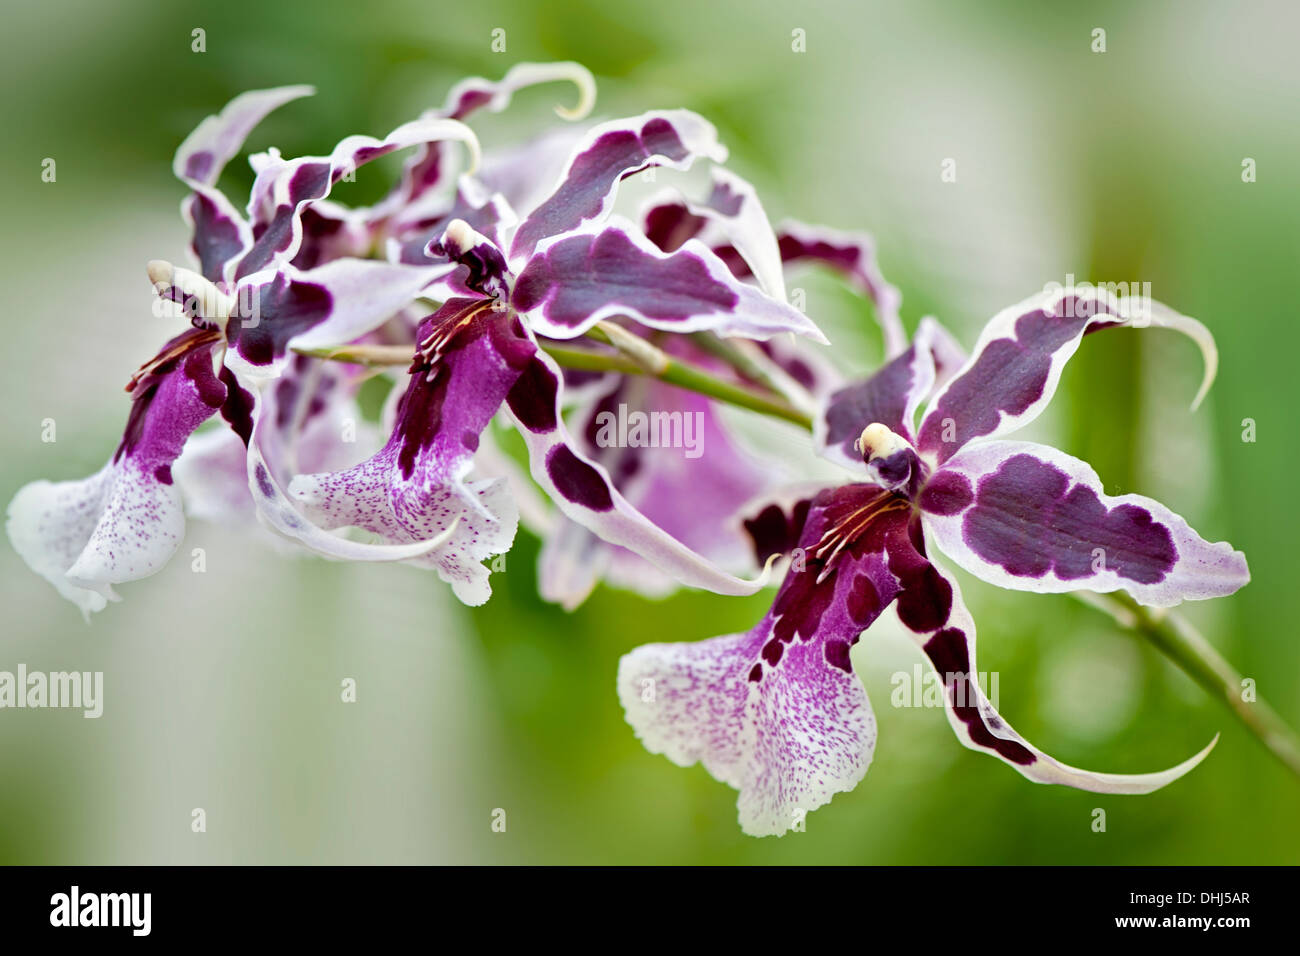 Close-up image of the beautiful Beallara Peggy Ruth Carpenter purple orchid flowers, taken against a soft background. Stock Photo